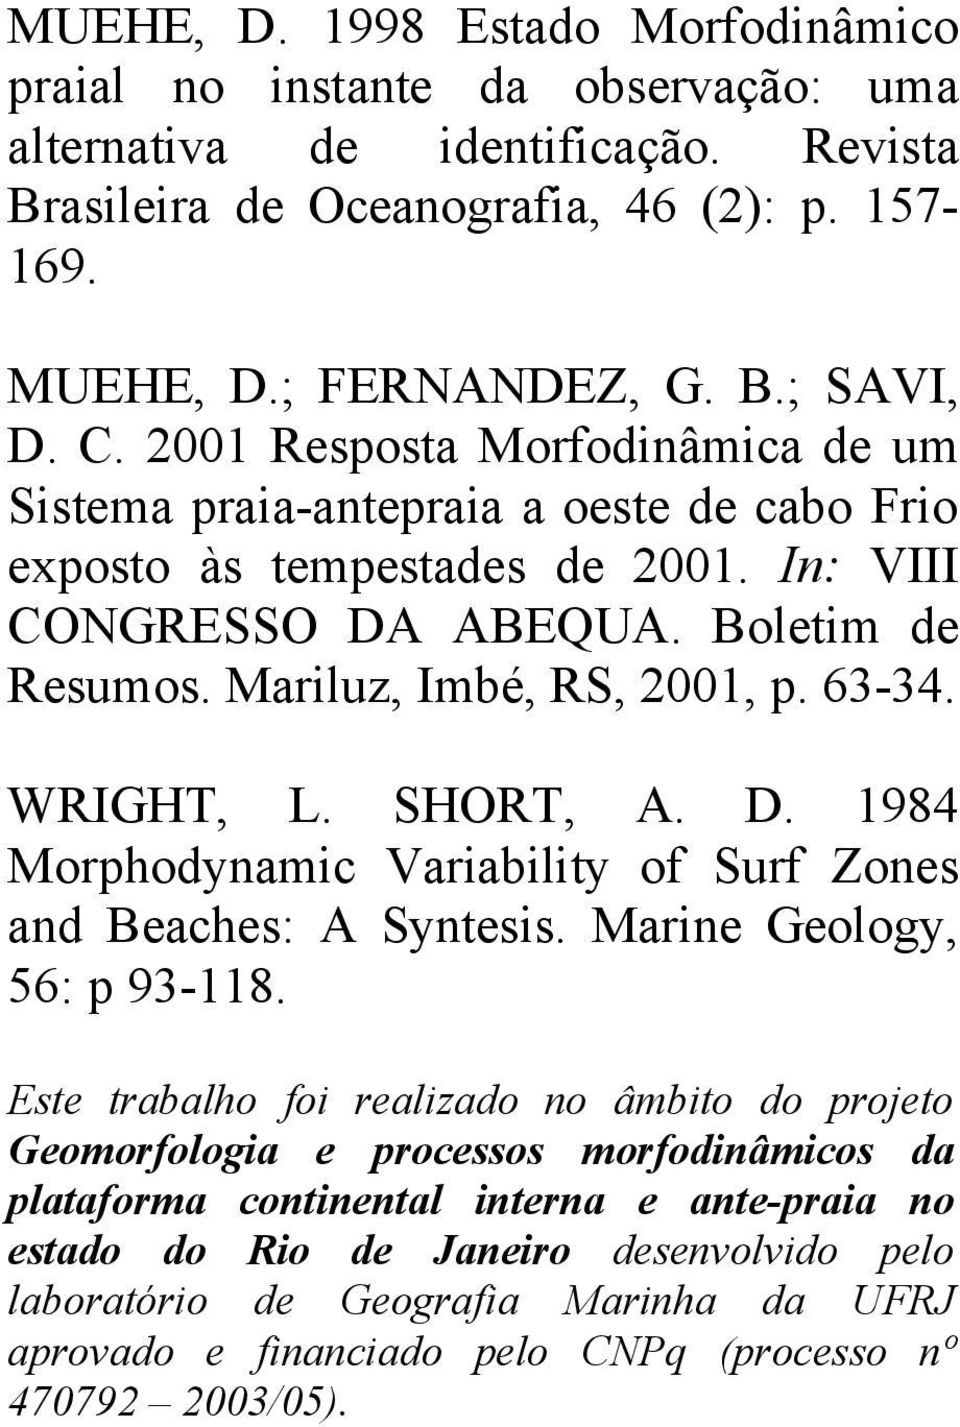 WRIGHT, L. SHORT, A. D. 1984 Morphodynamic Variability of Surf Zones and Beaches: A Syntesis. Marine Geology, 56: p 93-118.